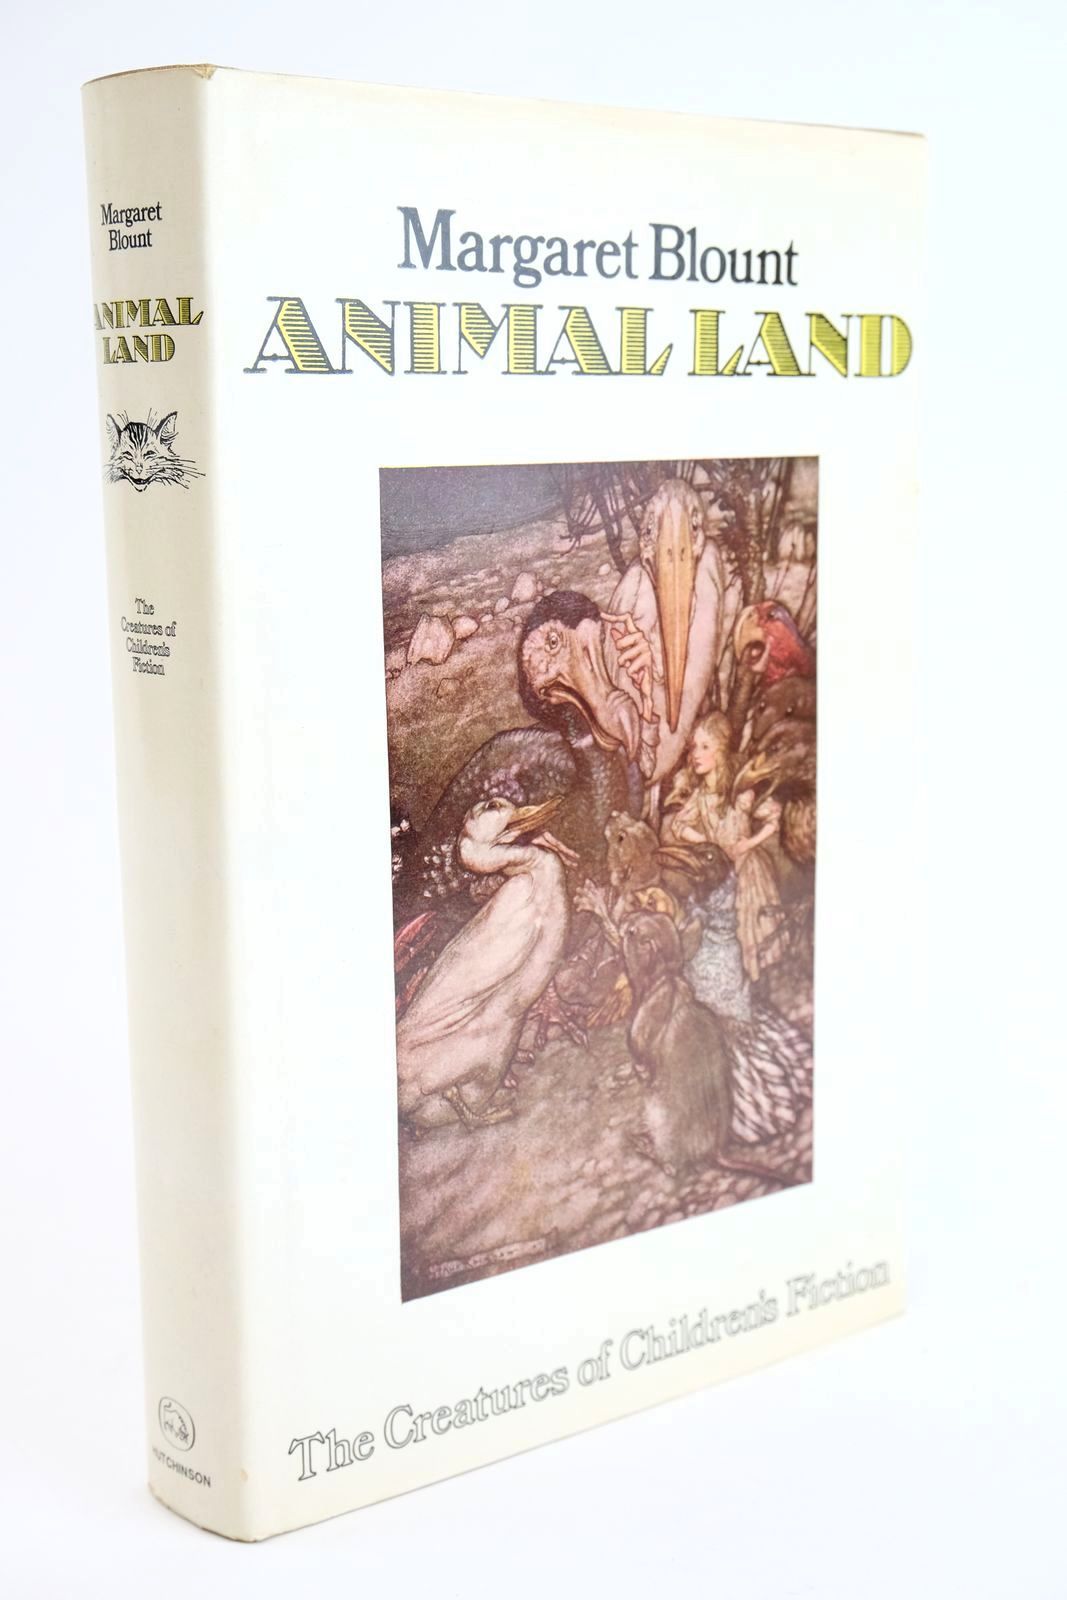 Photo of ANIMAL LAND THE CREATURES OF CHILDREN'S FICTION- Stock Number: 1323678